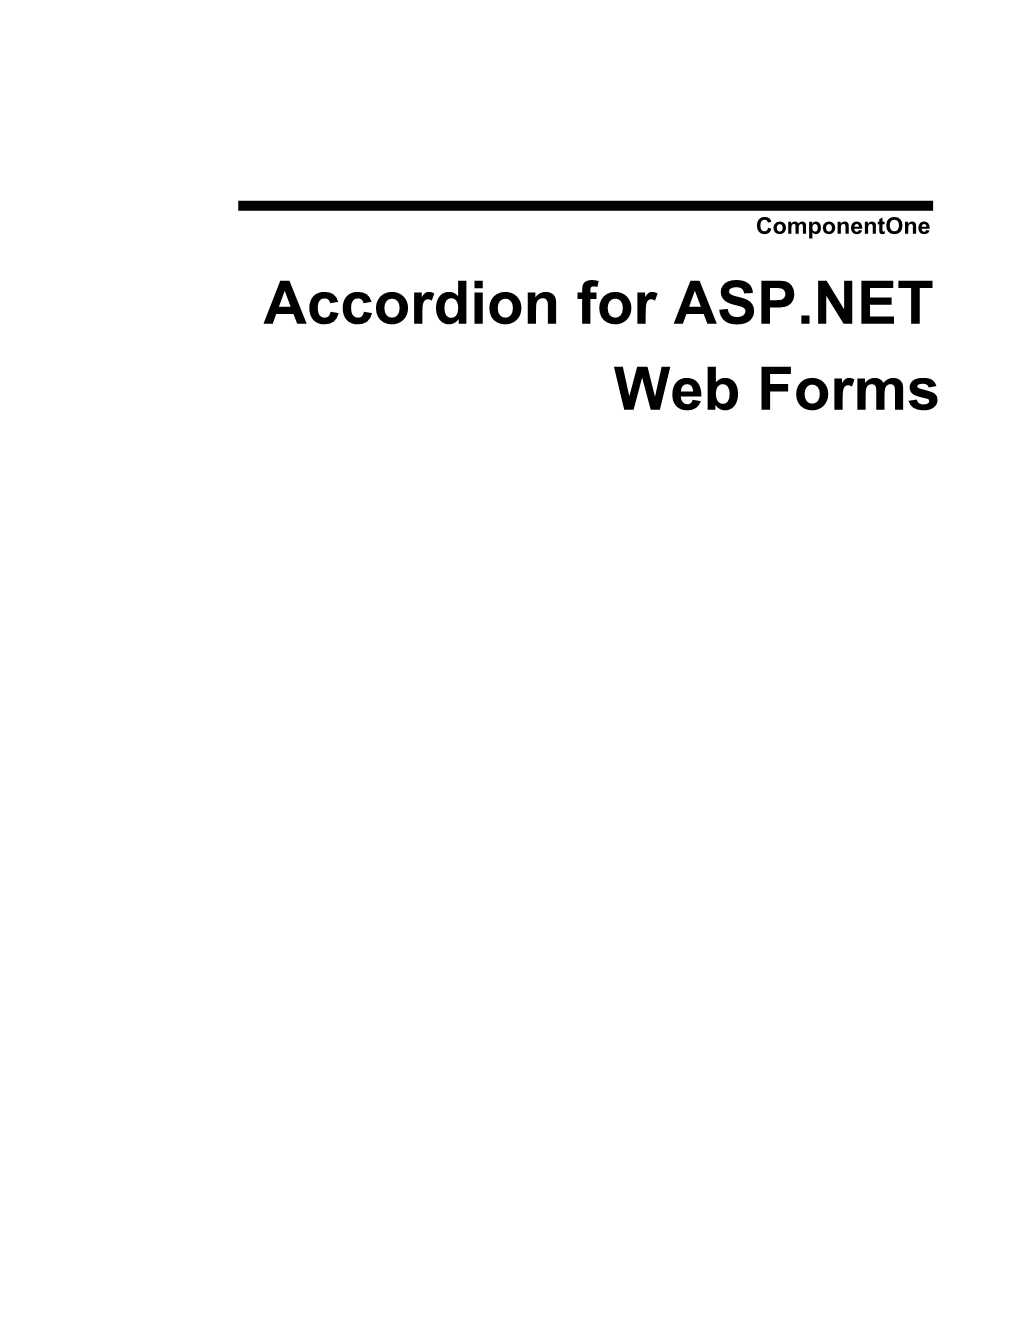 Accordion for ASP.NET Web Forms